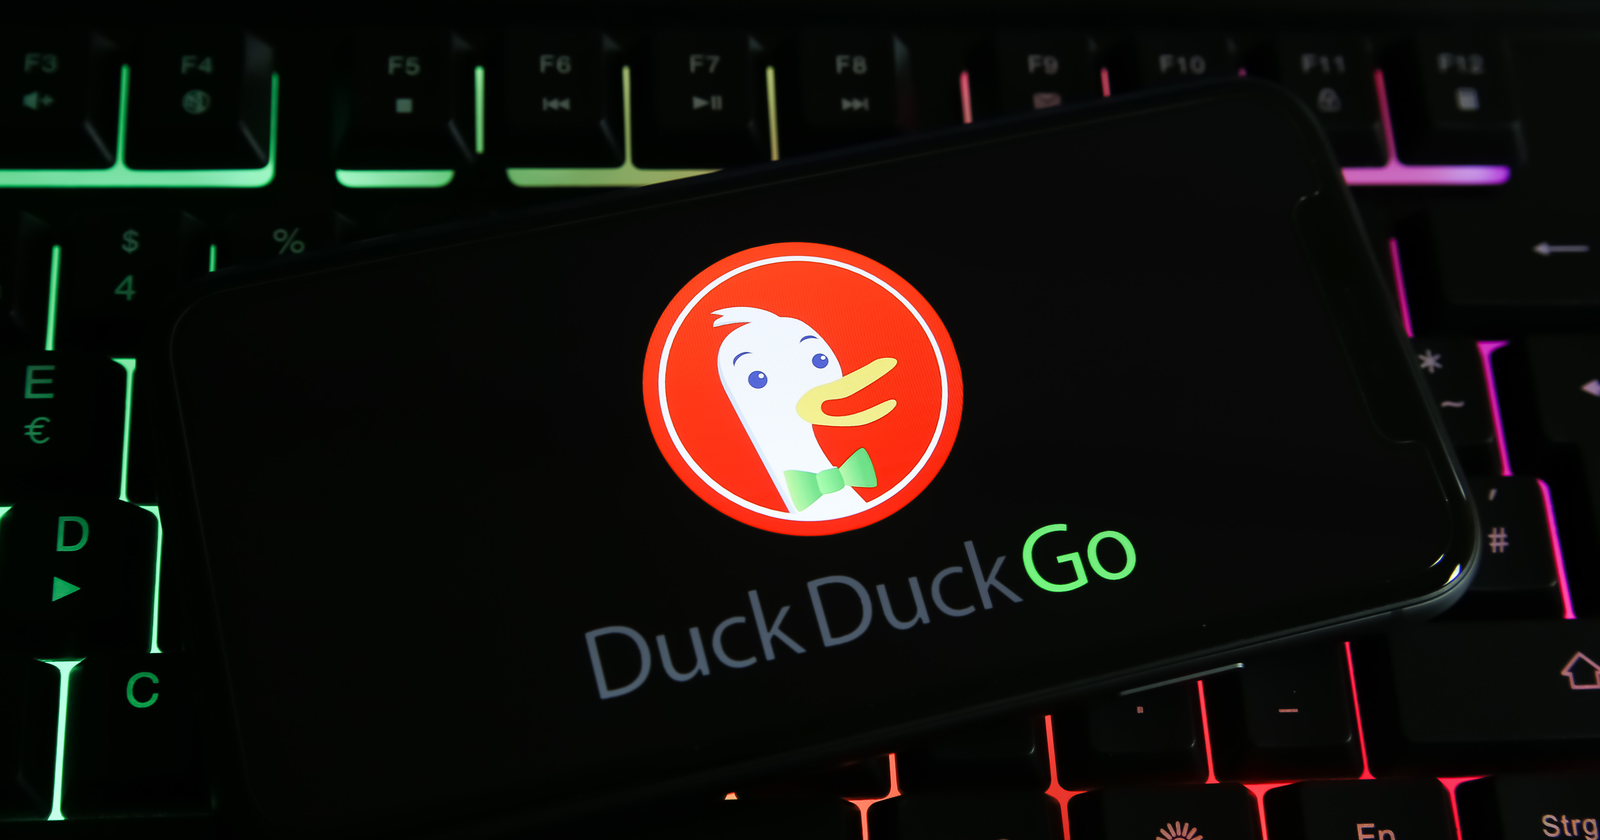 DuckDuckGo Reaches 100B Searches, But Growth Is Slowing Down via @sejournal, @MattGSouthern